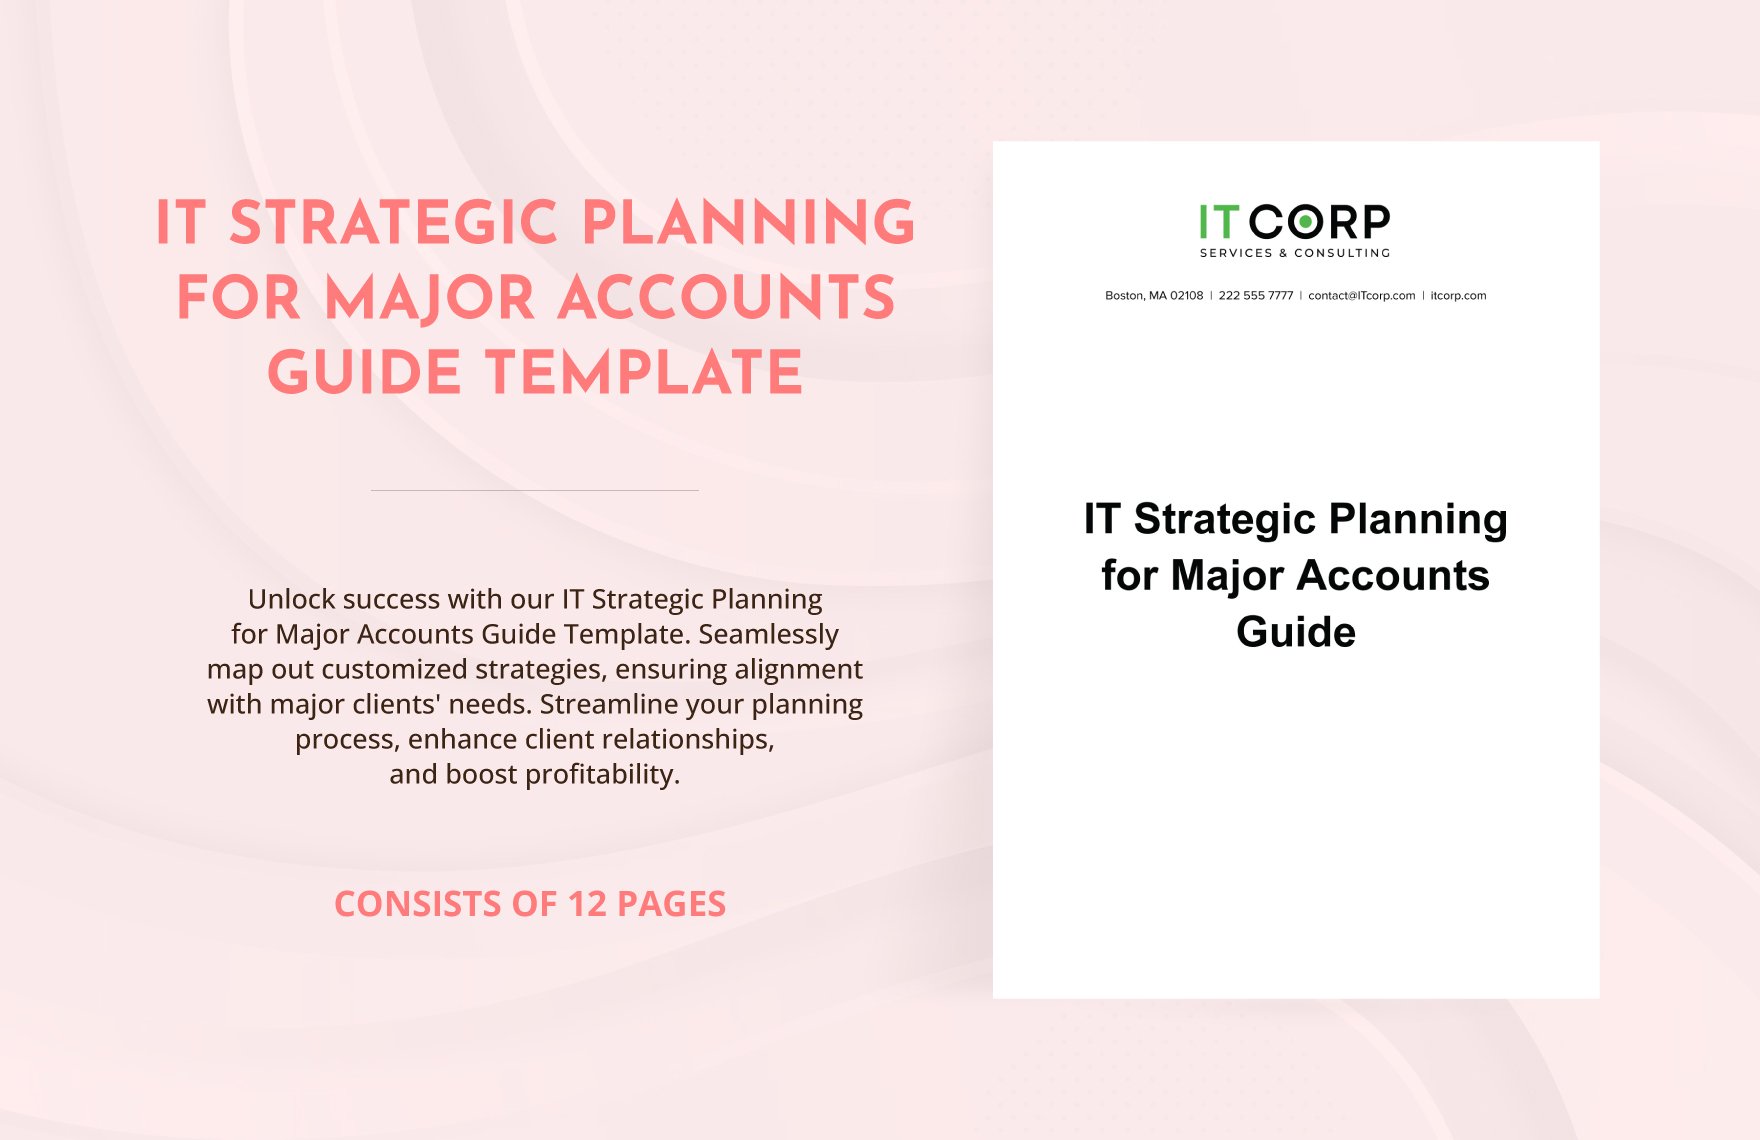 IT Strategic Planning for Major Accounts Guide Template